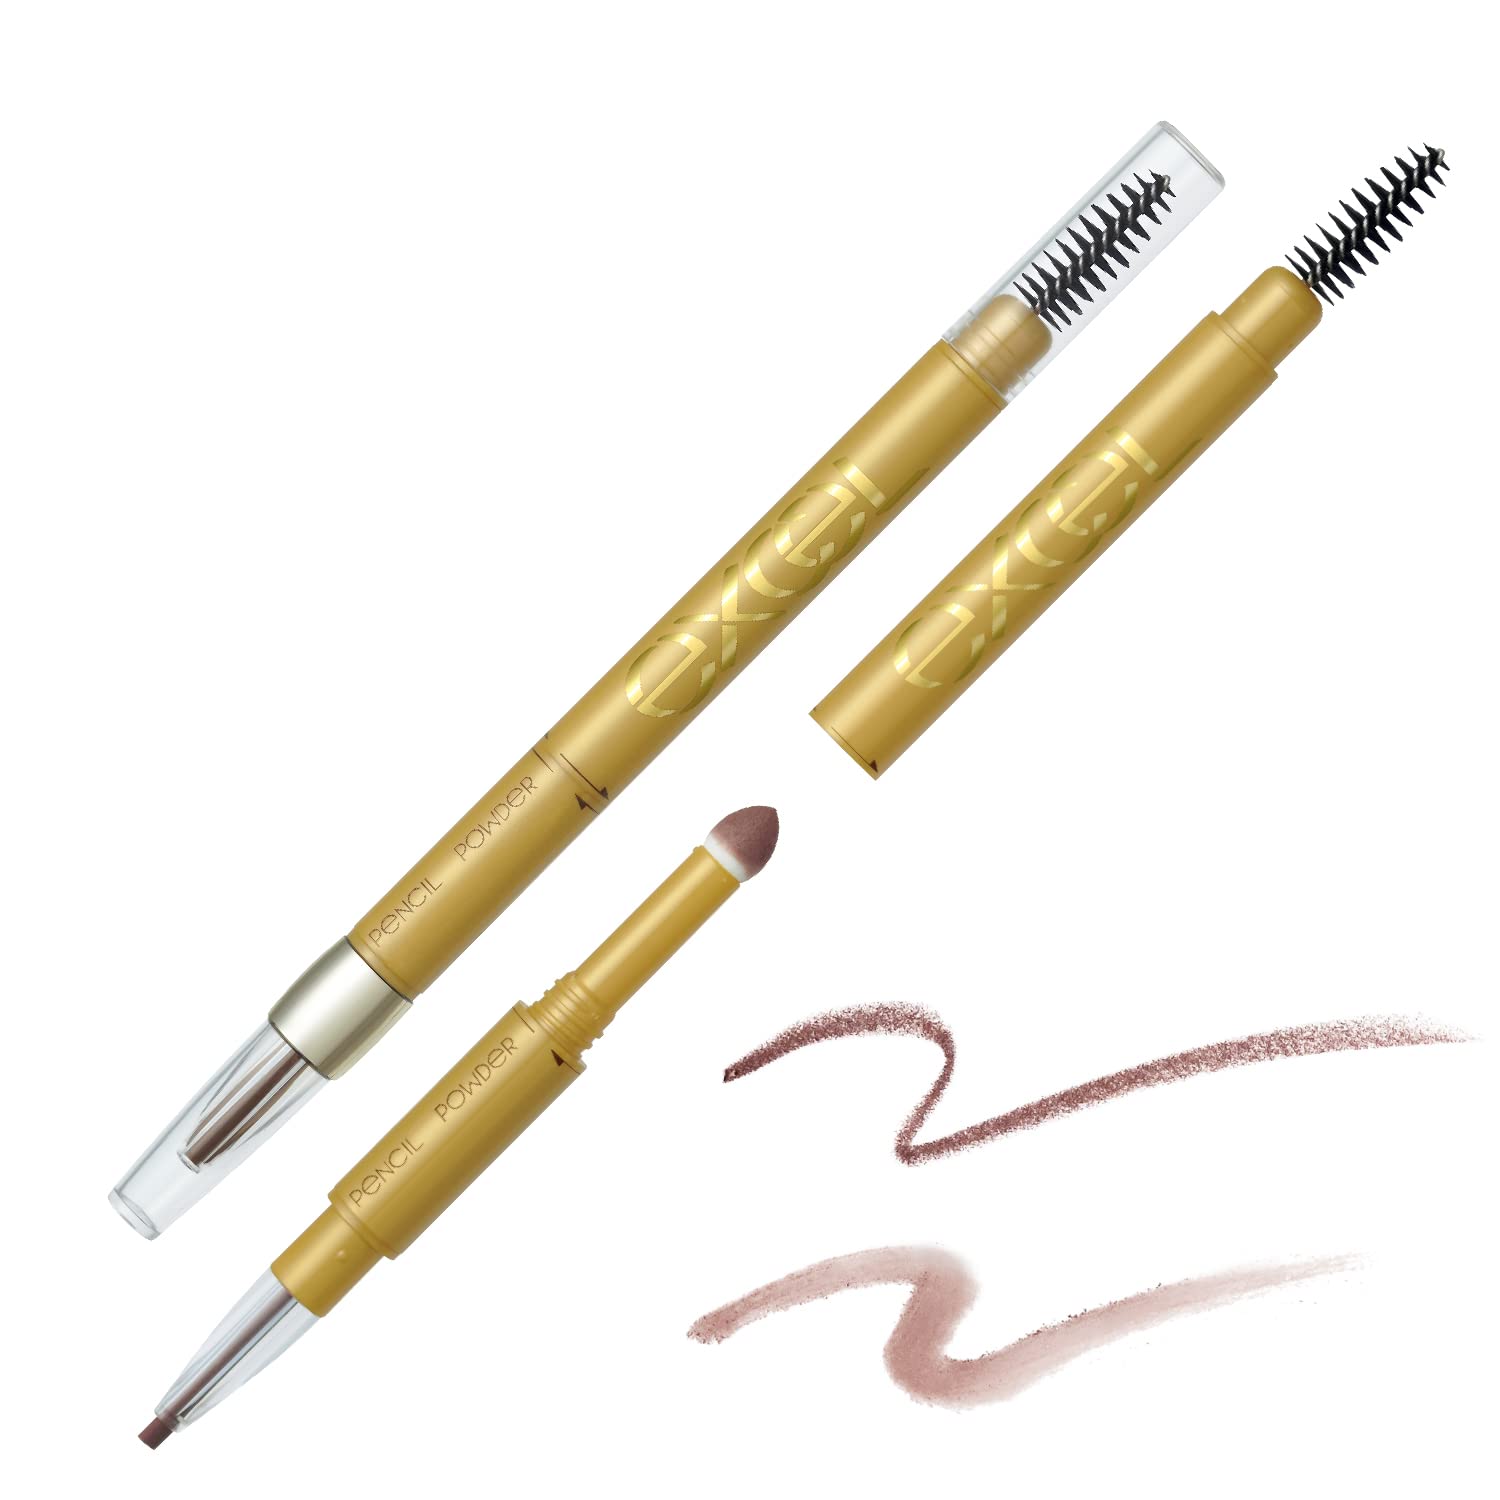 Excel Powder & Pencil Eyebrow EX PD14 (Mauve Brown) 3 - in - 1 - Japanese Eyebrow